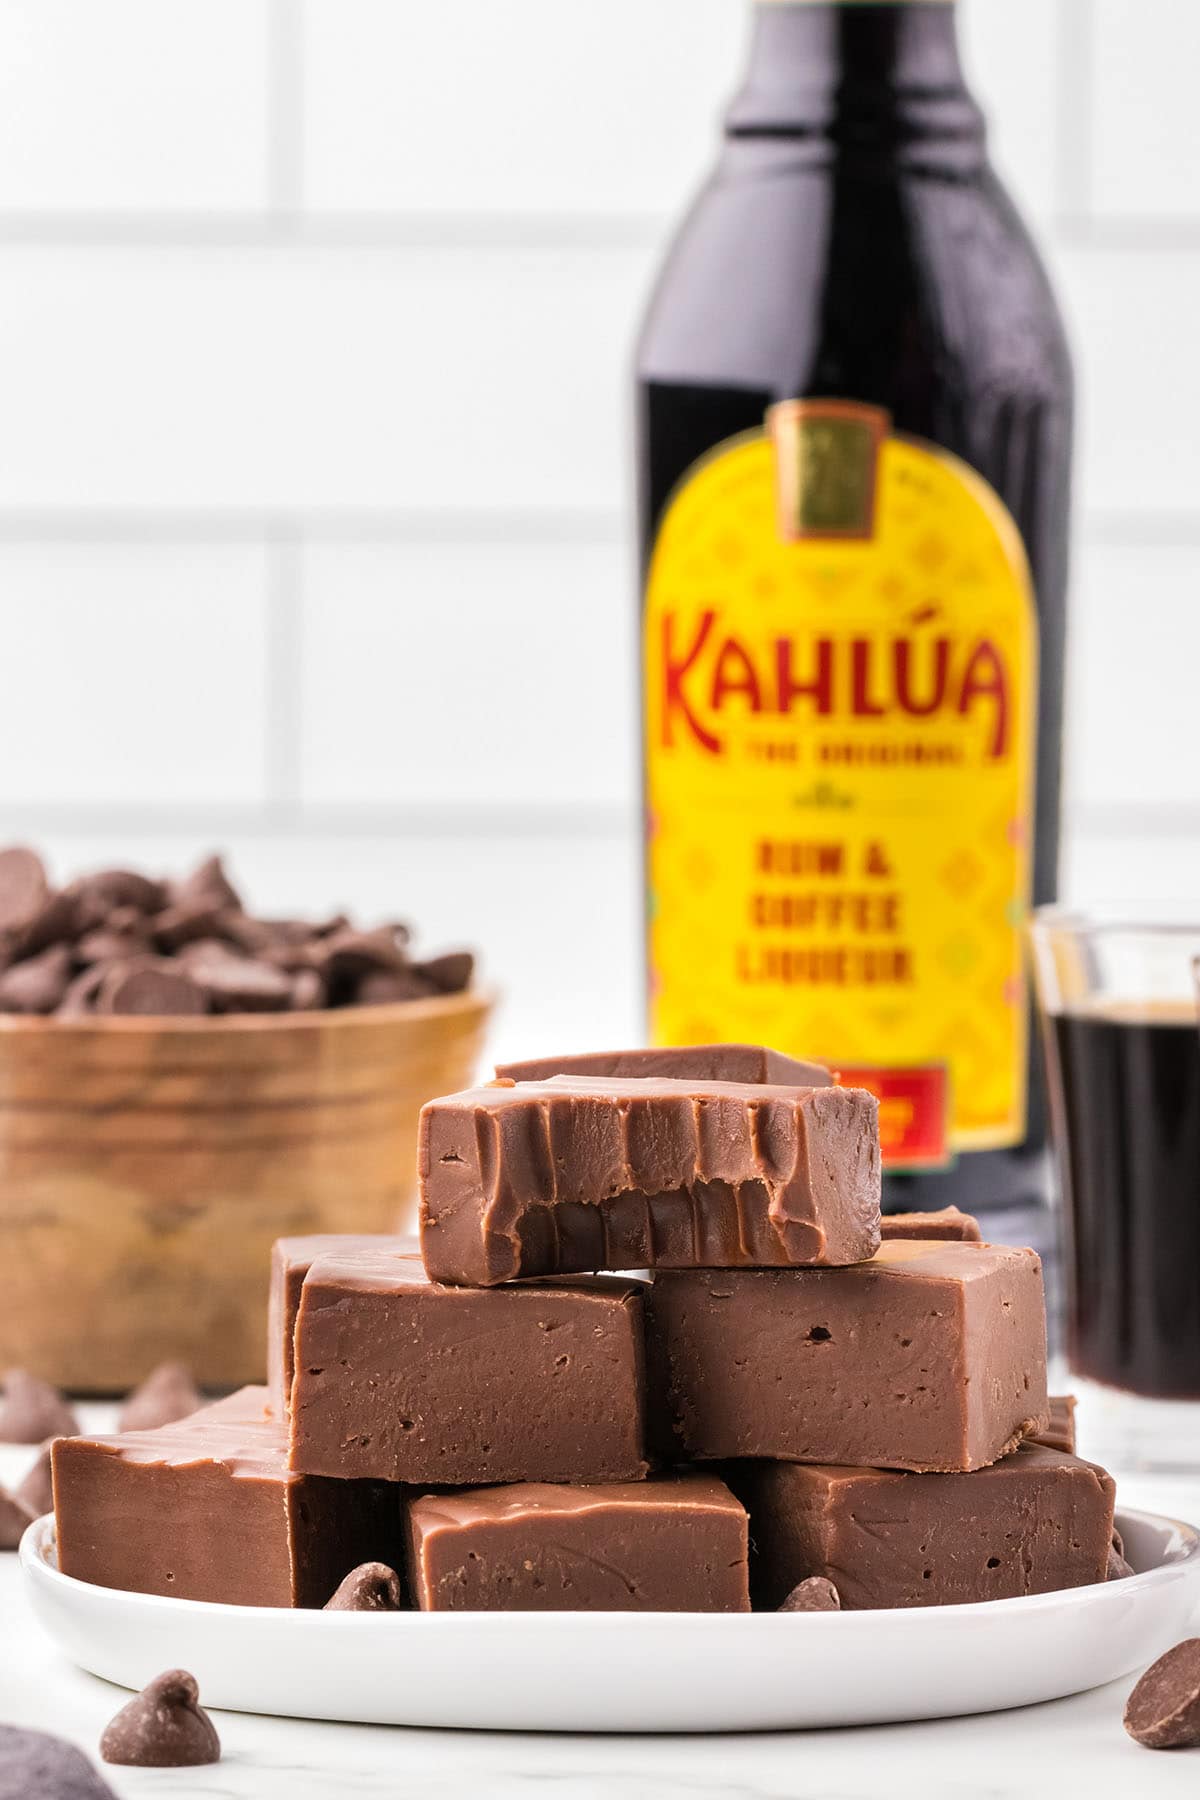 a couple of Kahlua Fudge on the plate with a bottle of Kahlua in the background.